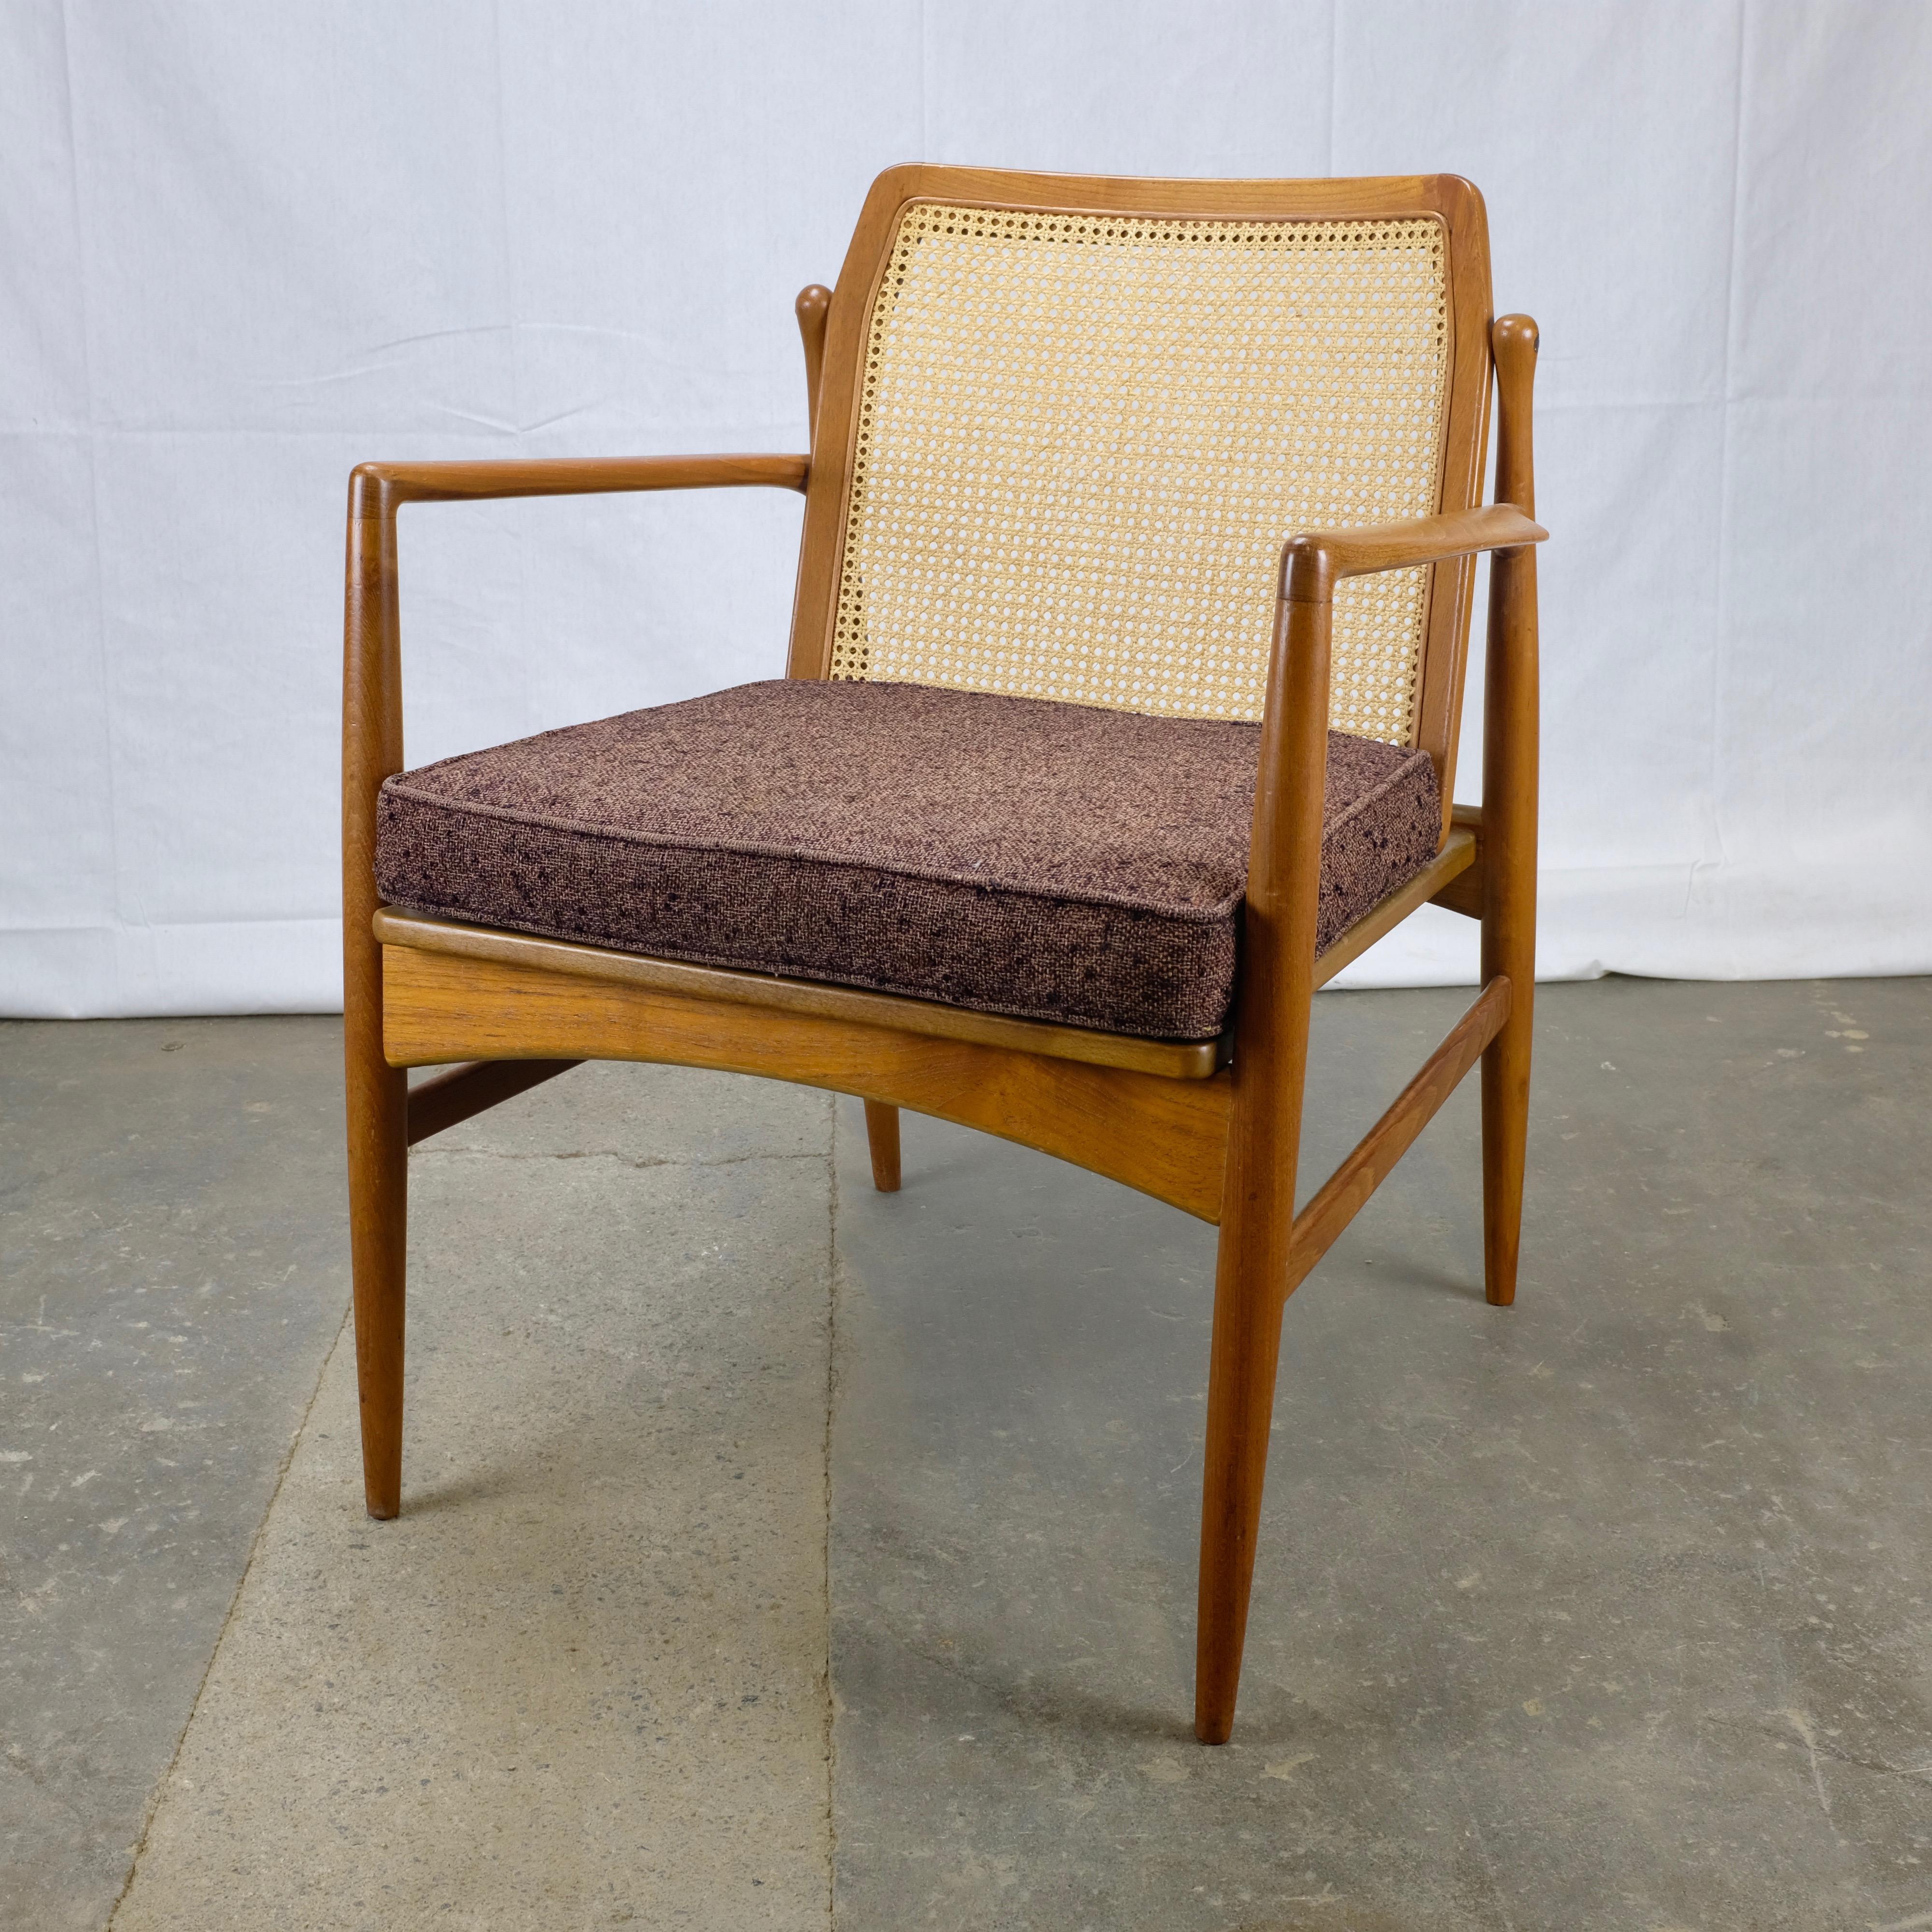 Teak armchair designed by Ib Kofod-Larsen and made in Denmark by Selig. It features a distinctive cane back, and the rear legs terminate in unique 'bulbs' that join the back frame to the legs. The chair has elegant upward-sloping armrests that are